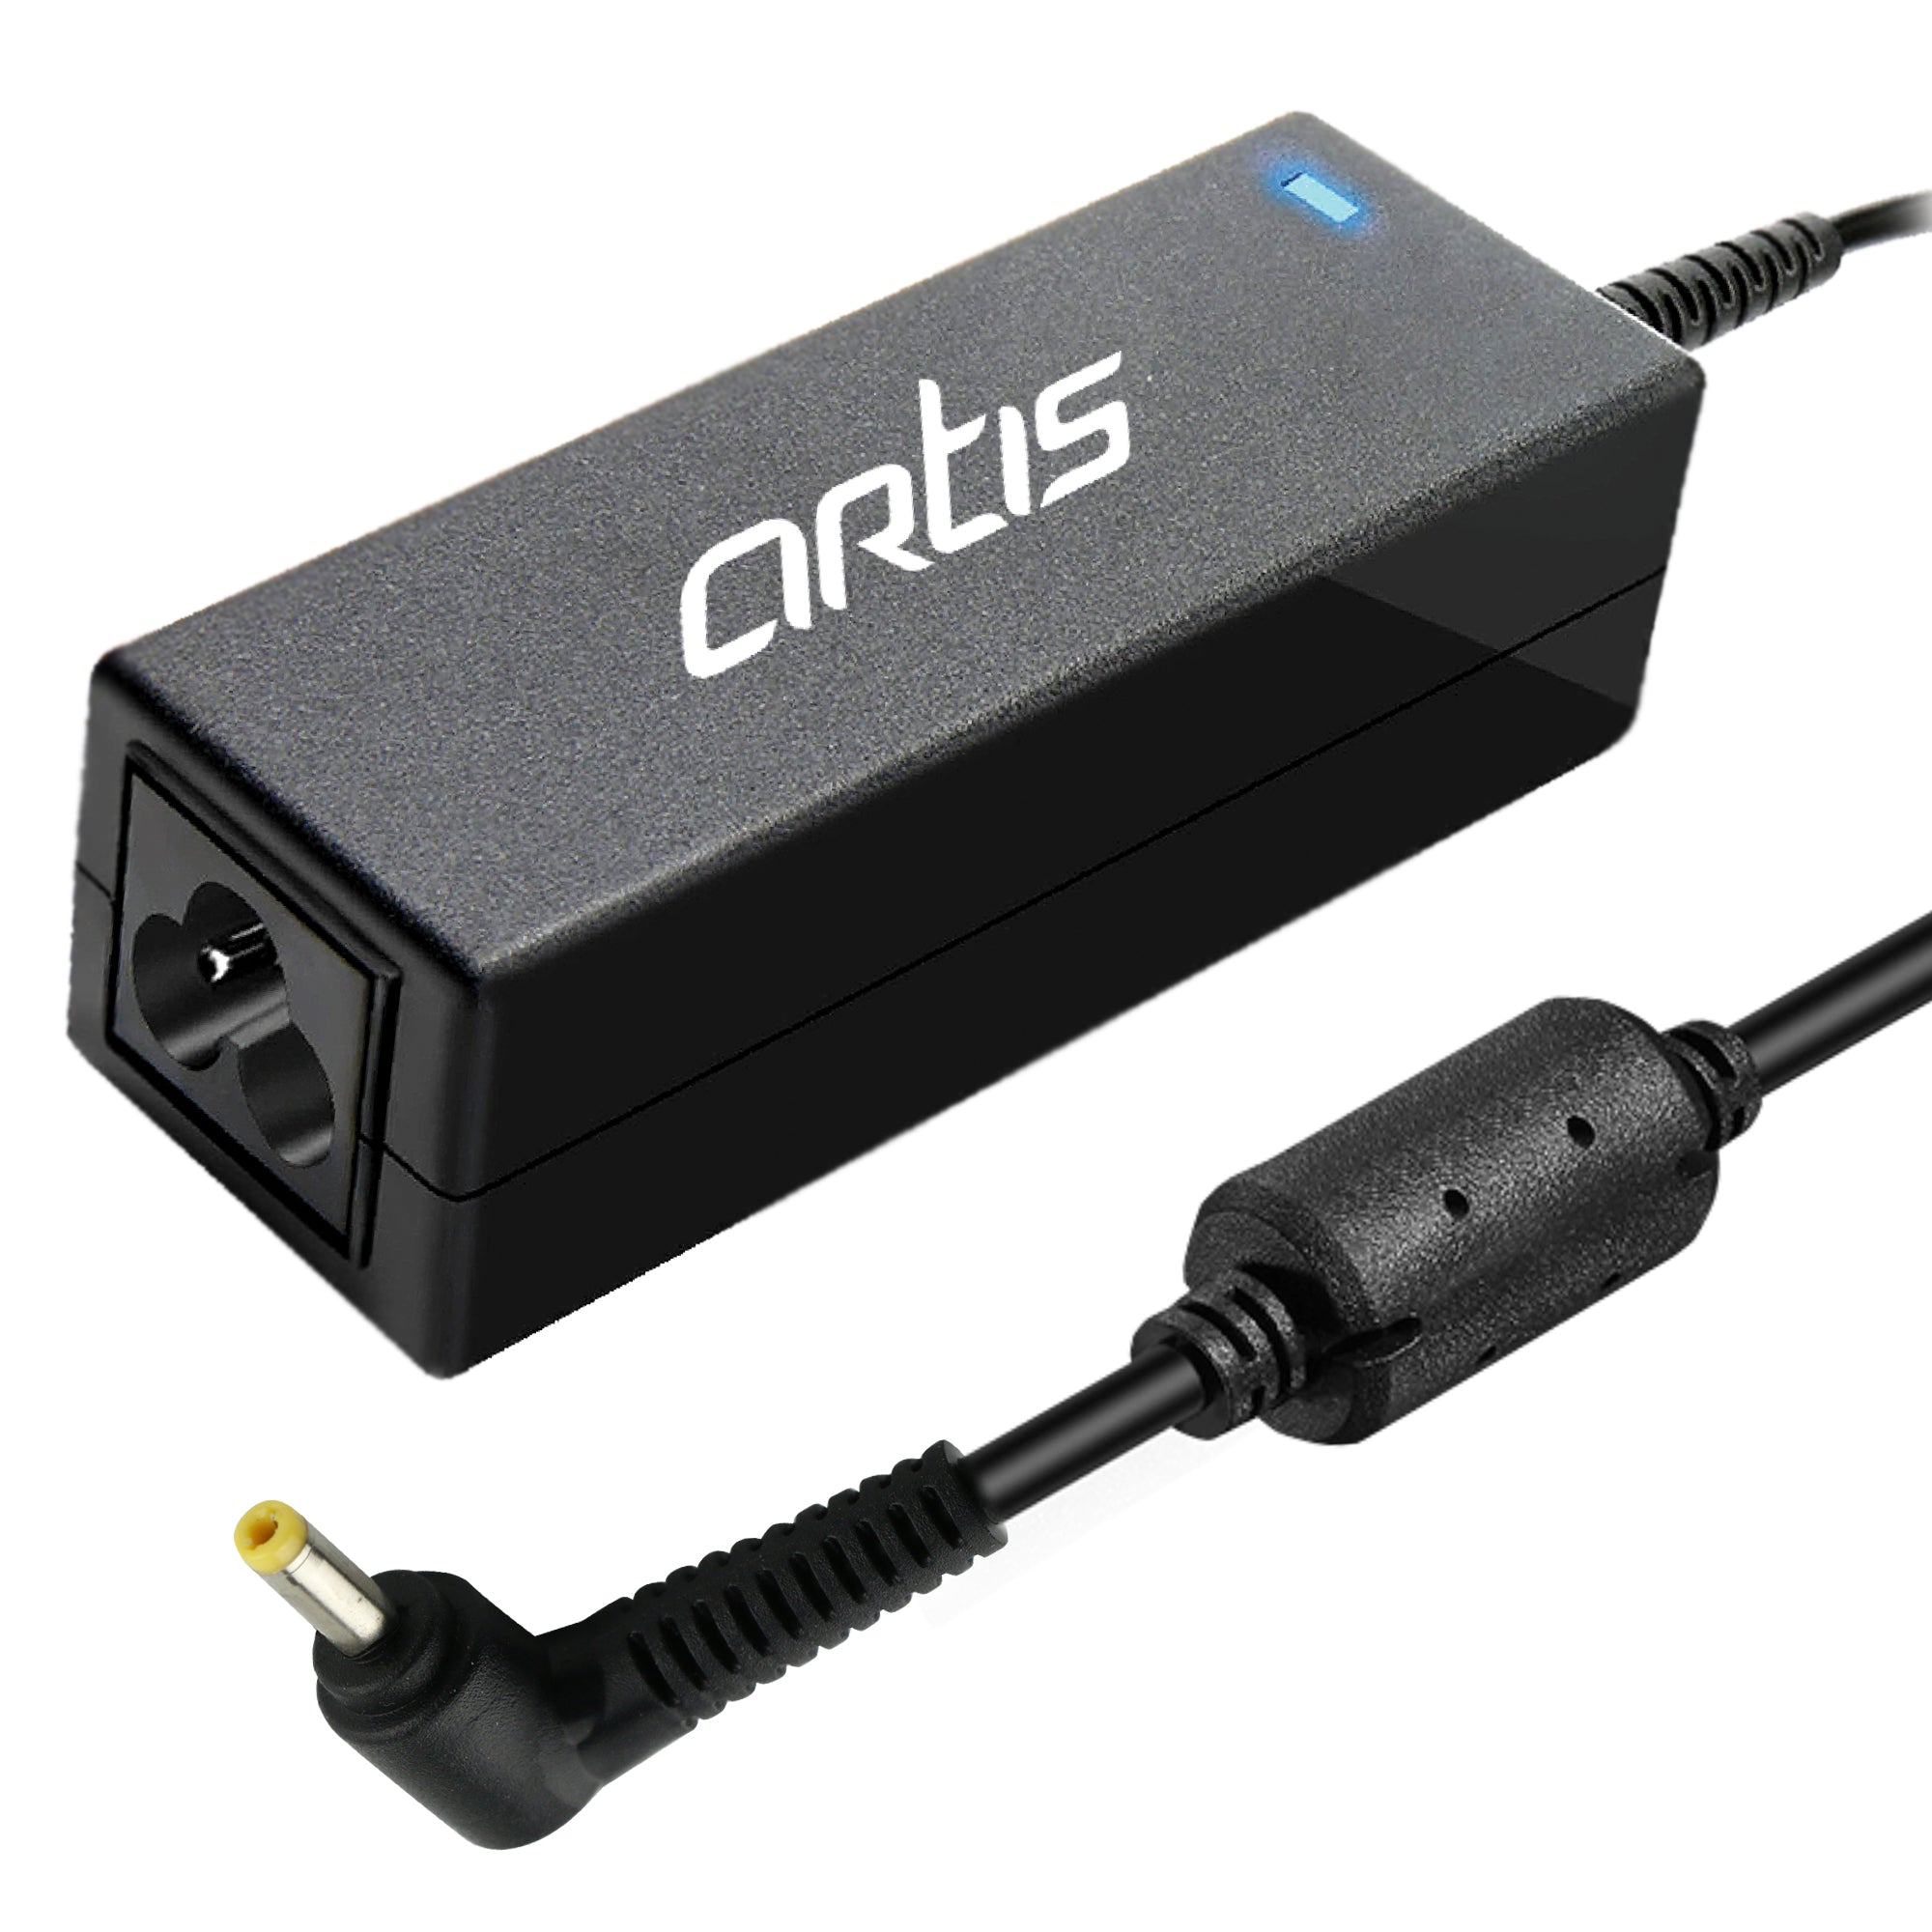 A0404 45Watt Laptop Adapter Compatible with Lenovo Laptops (20V/2.25A ,Pin: 4.0 x 1.7mm)